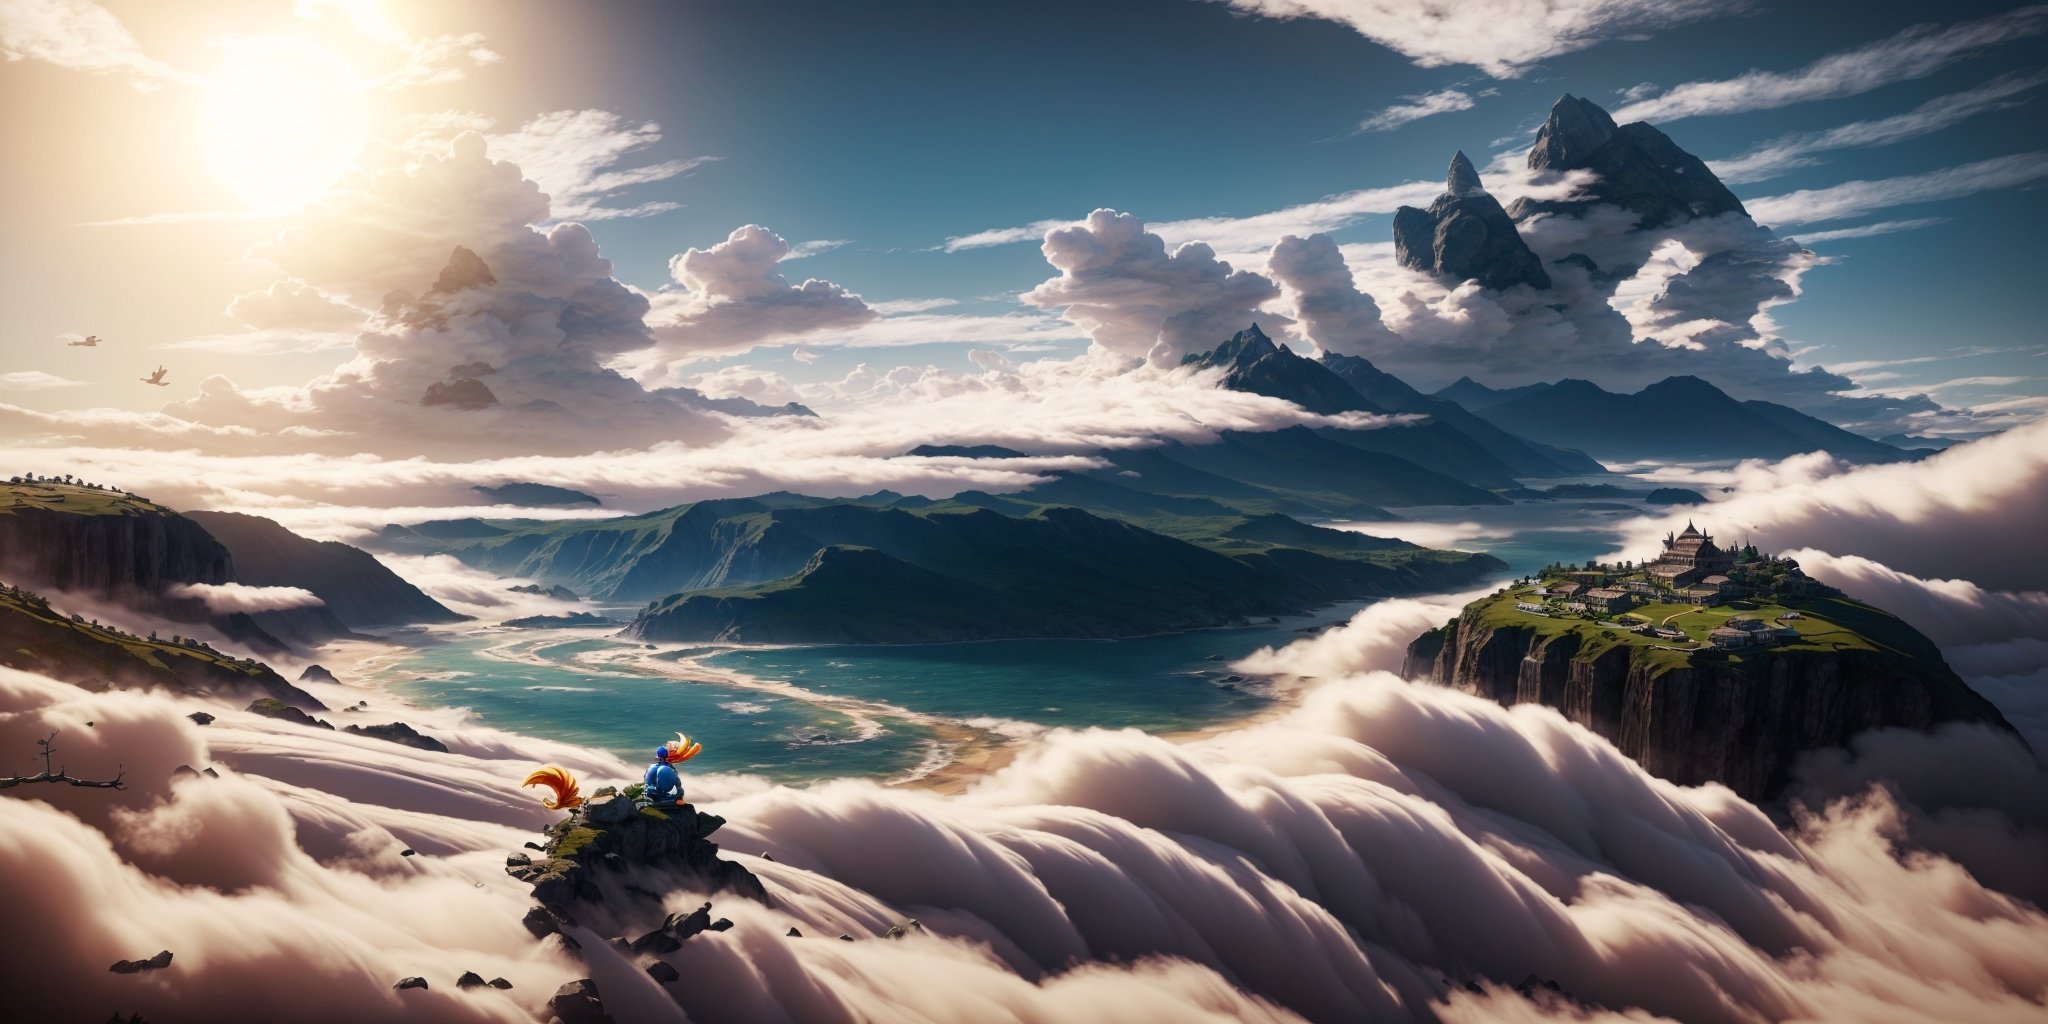 realistic dragon ball kami house in distance,sea iwth mountains on side,clouds makes a dragon,daytime,dragon ball anime,ai art